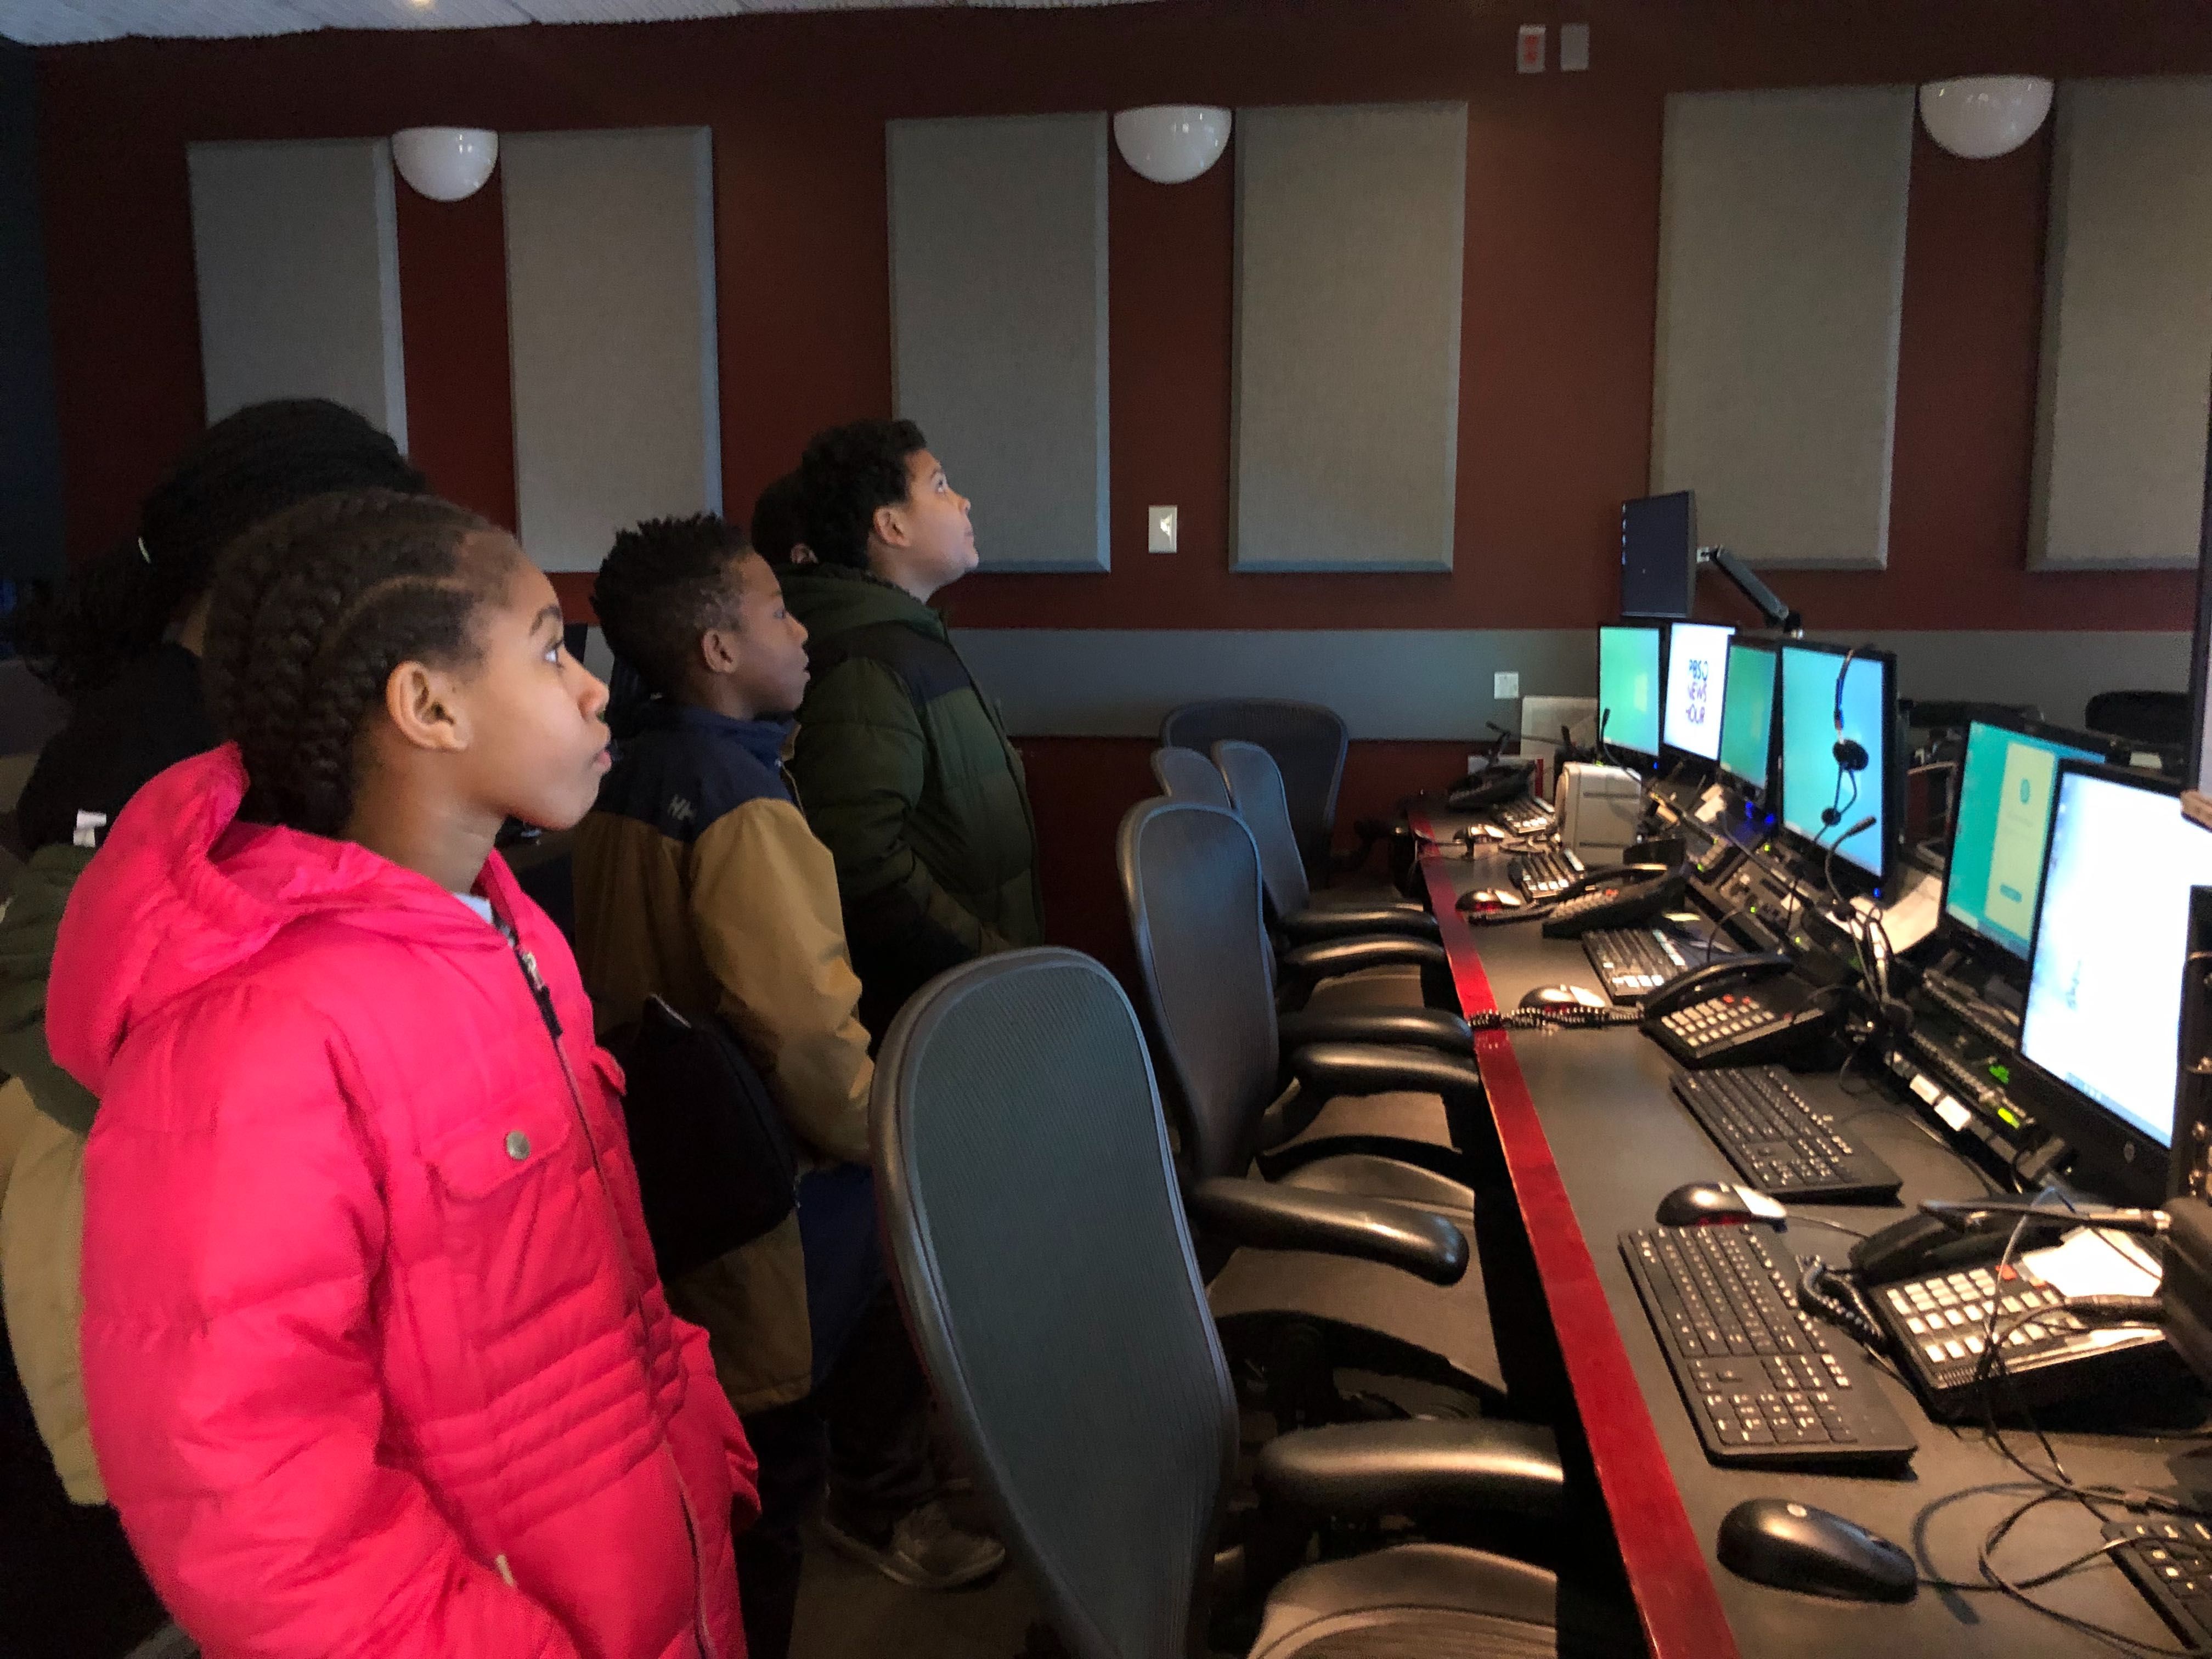 Students receive a behind-the-scenes tour of the control room at PBS NewsHour. Image by Libby Moeller. United States, 2020.